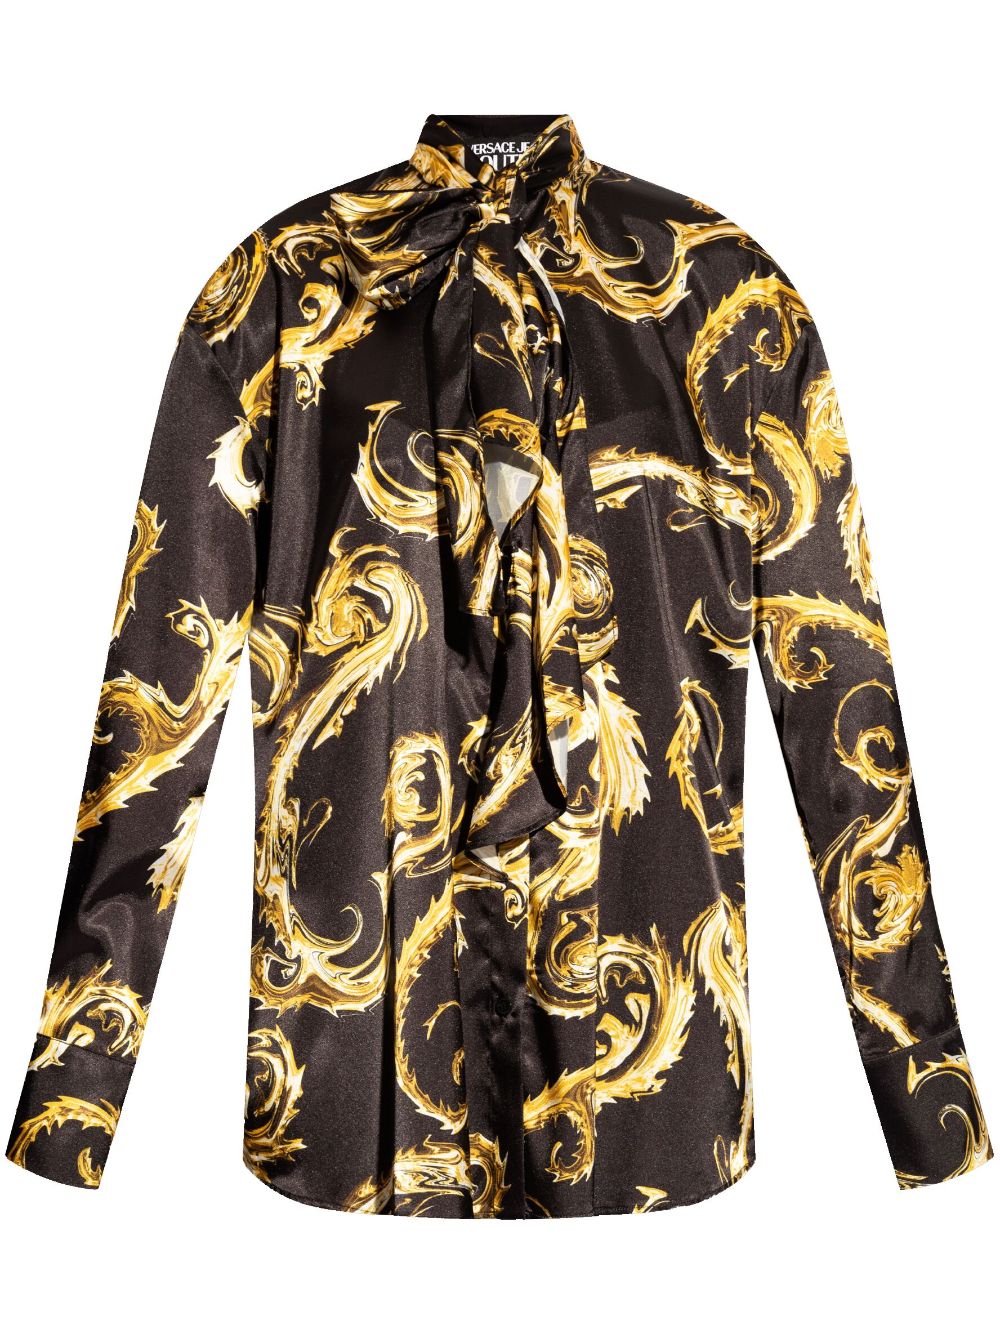 Versace Jeans Couture tied spike-print shirt - Black von Versace Jeans Couture